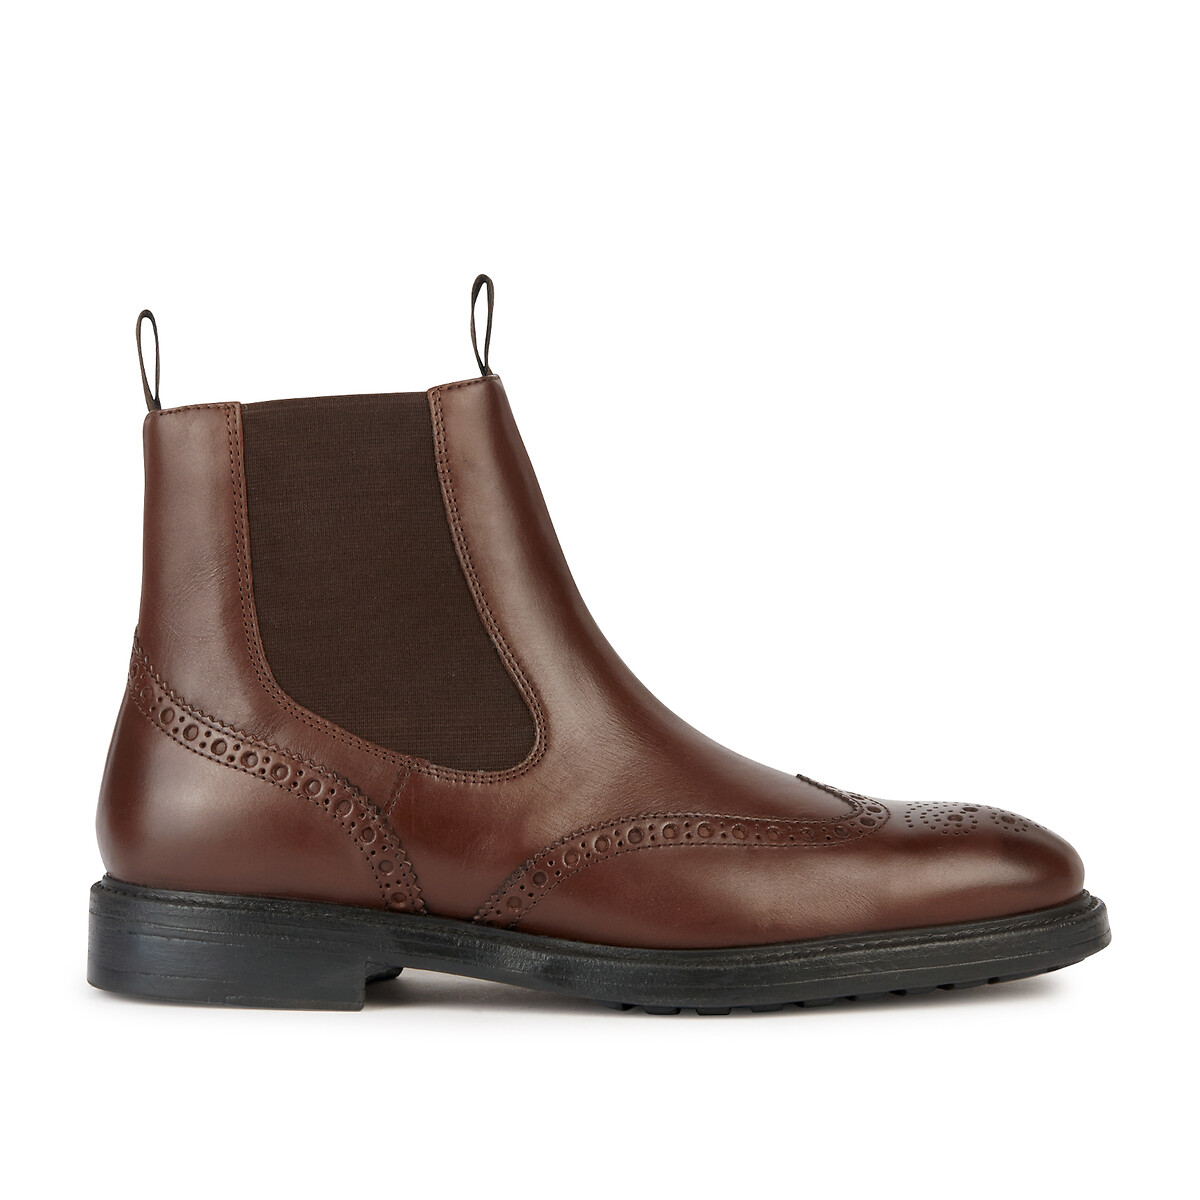 Tiberio Breathable Chelsea Boots in Leather